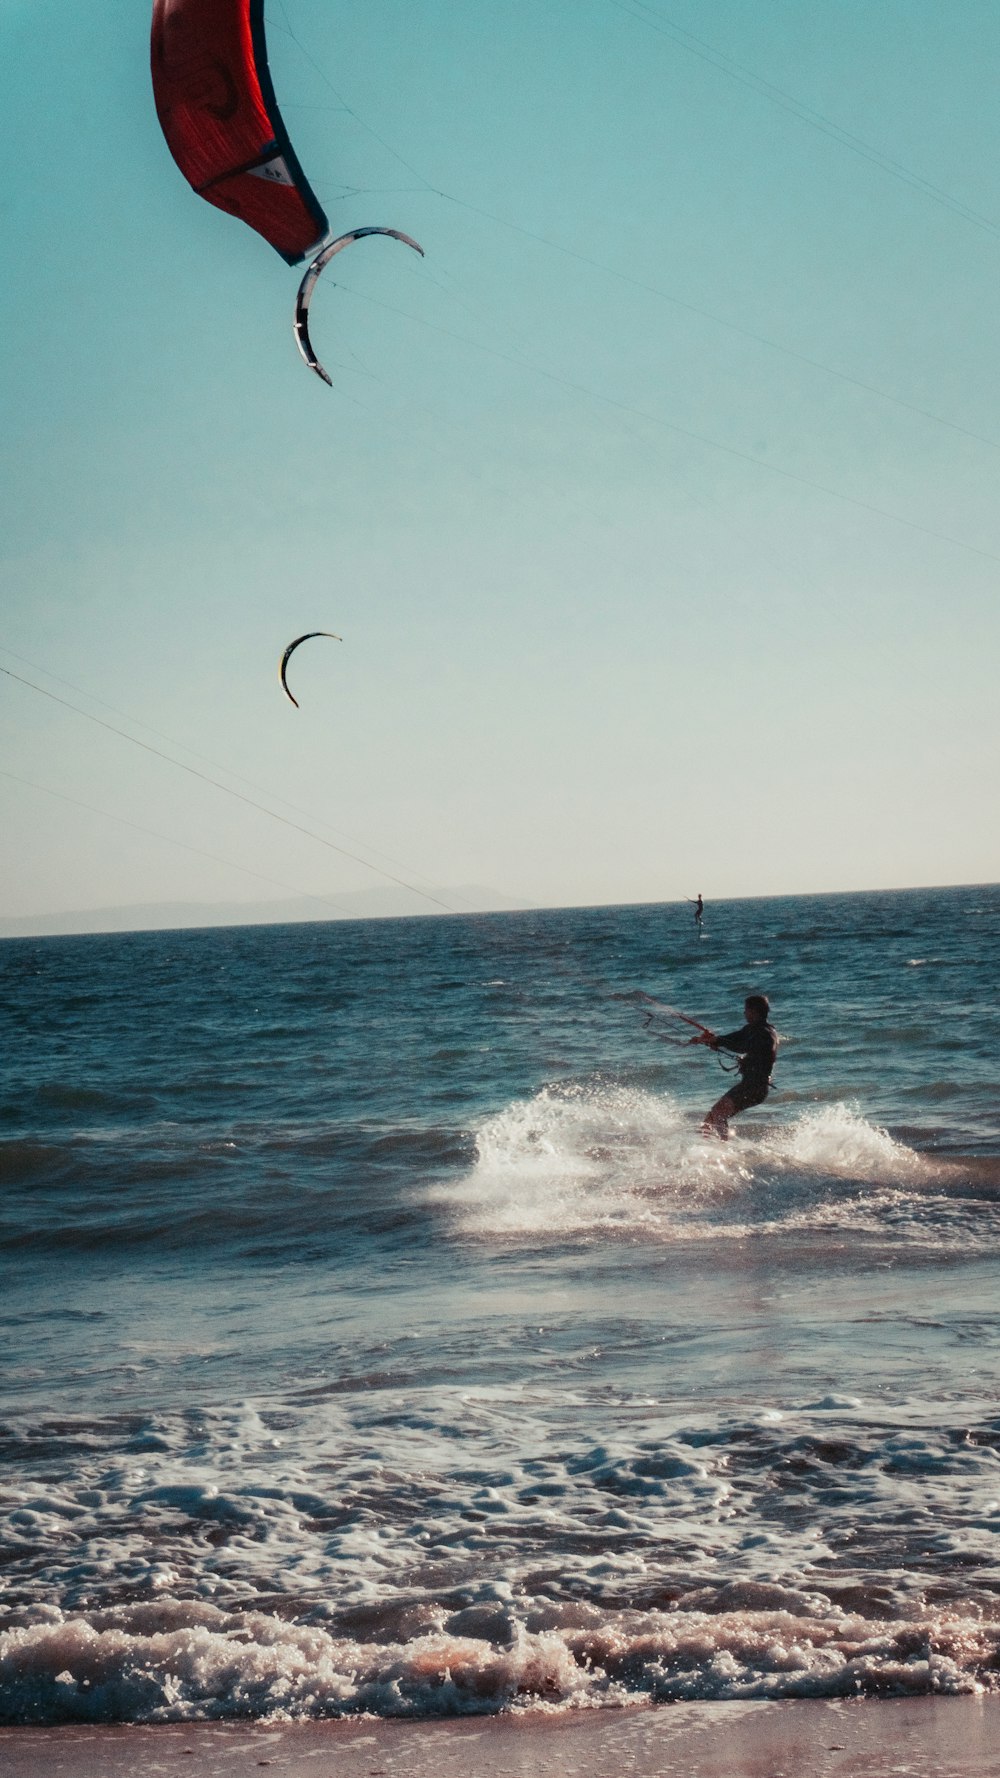 a person riding a kite board on a body of water